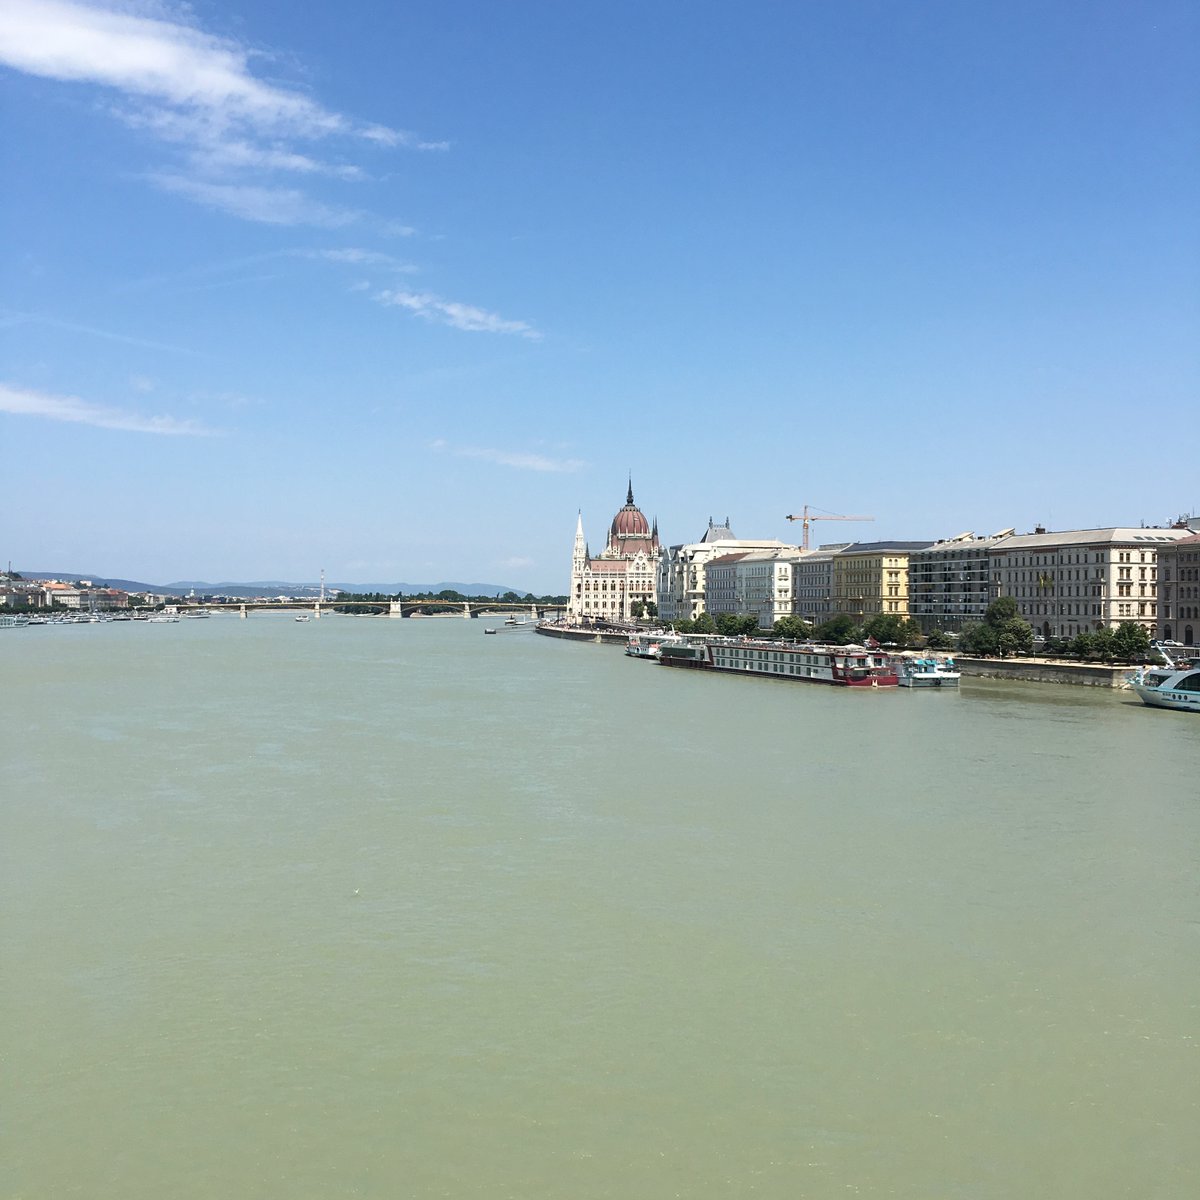 Made it to the Danube! Down the river, you see the Hungarian Parliament building. And then we went to look for lunch....  #theCitybyrail